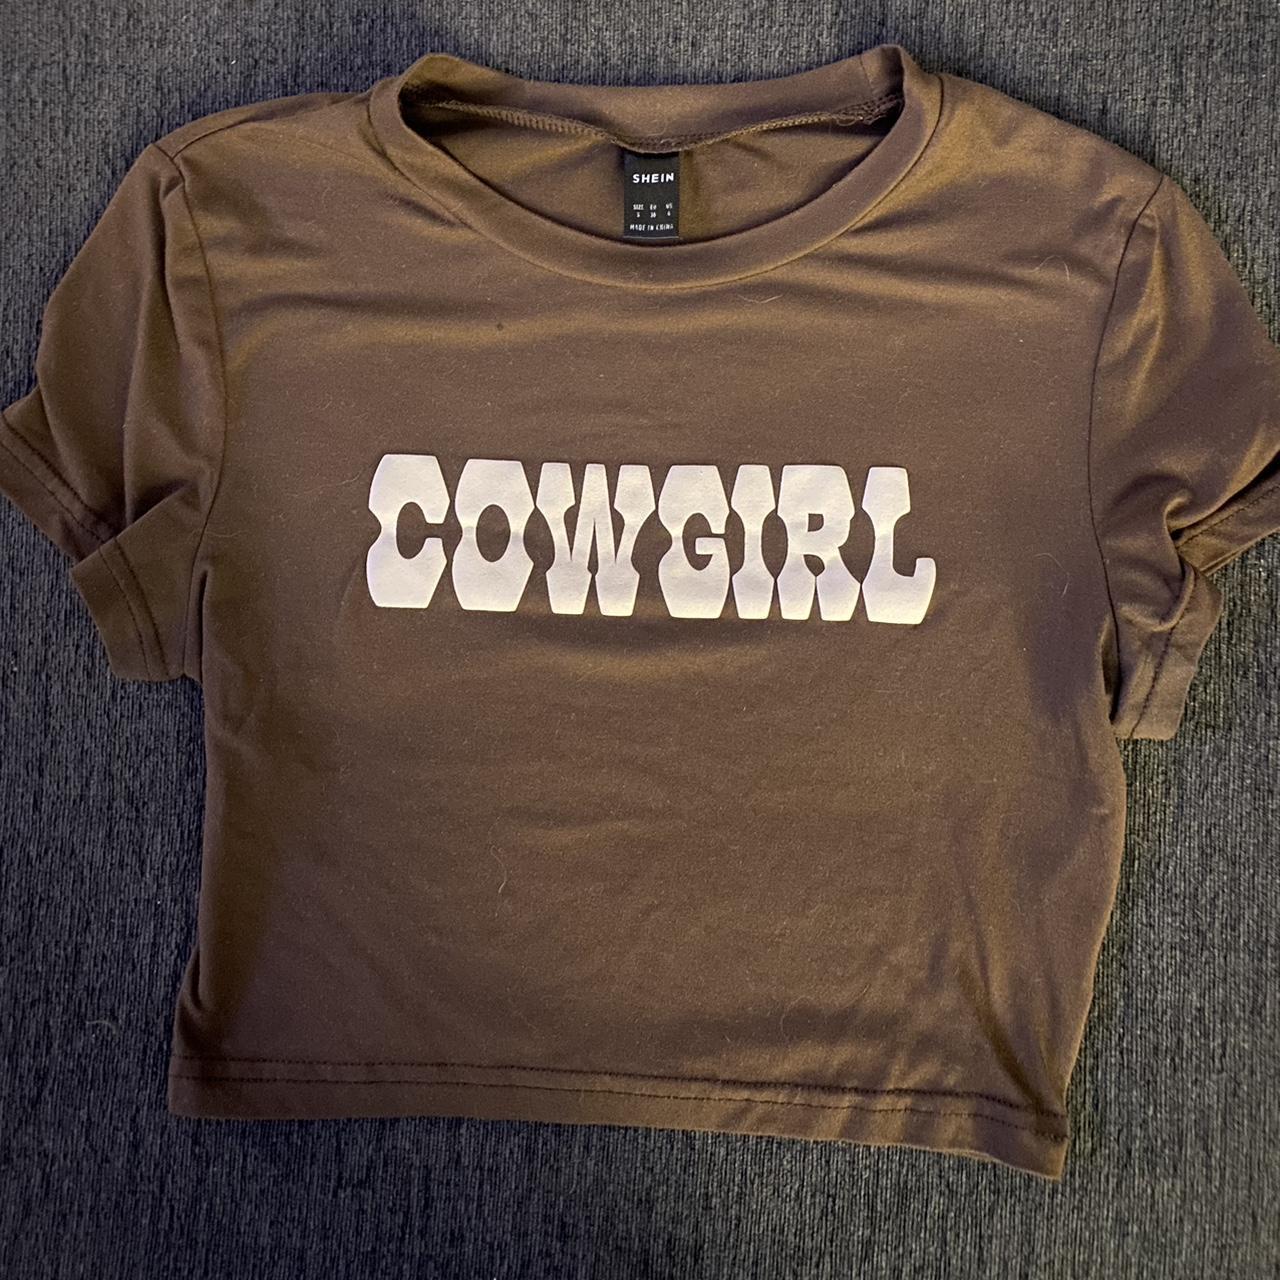 Brown Cowgirl crop 🤠 Size small #cowgirl - Depop